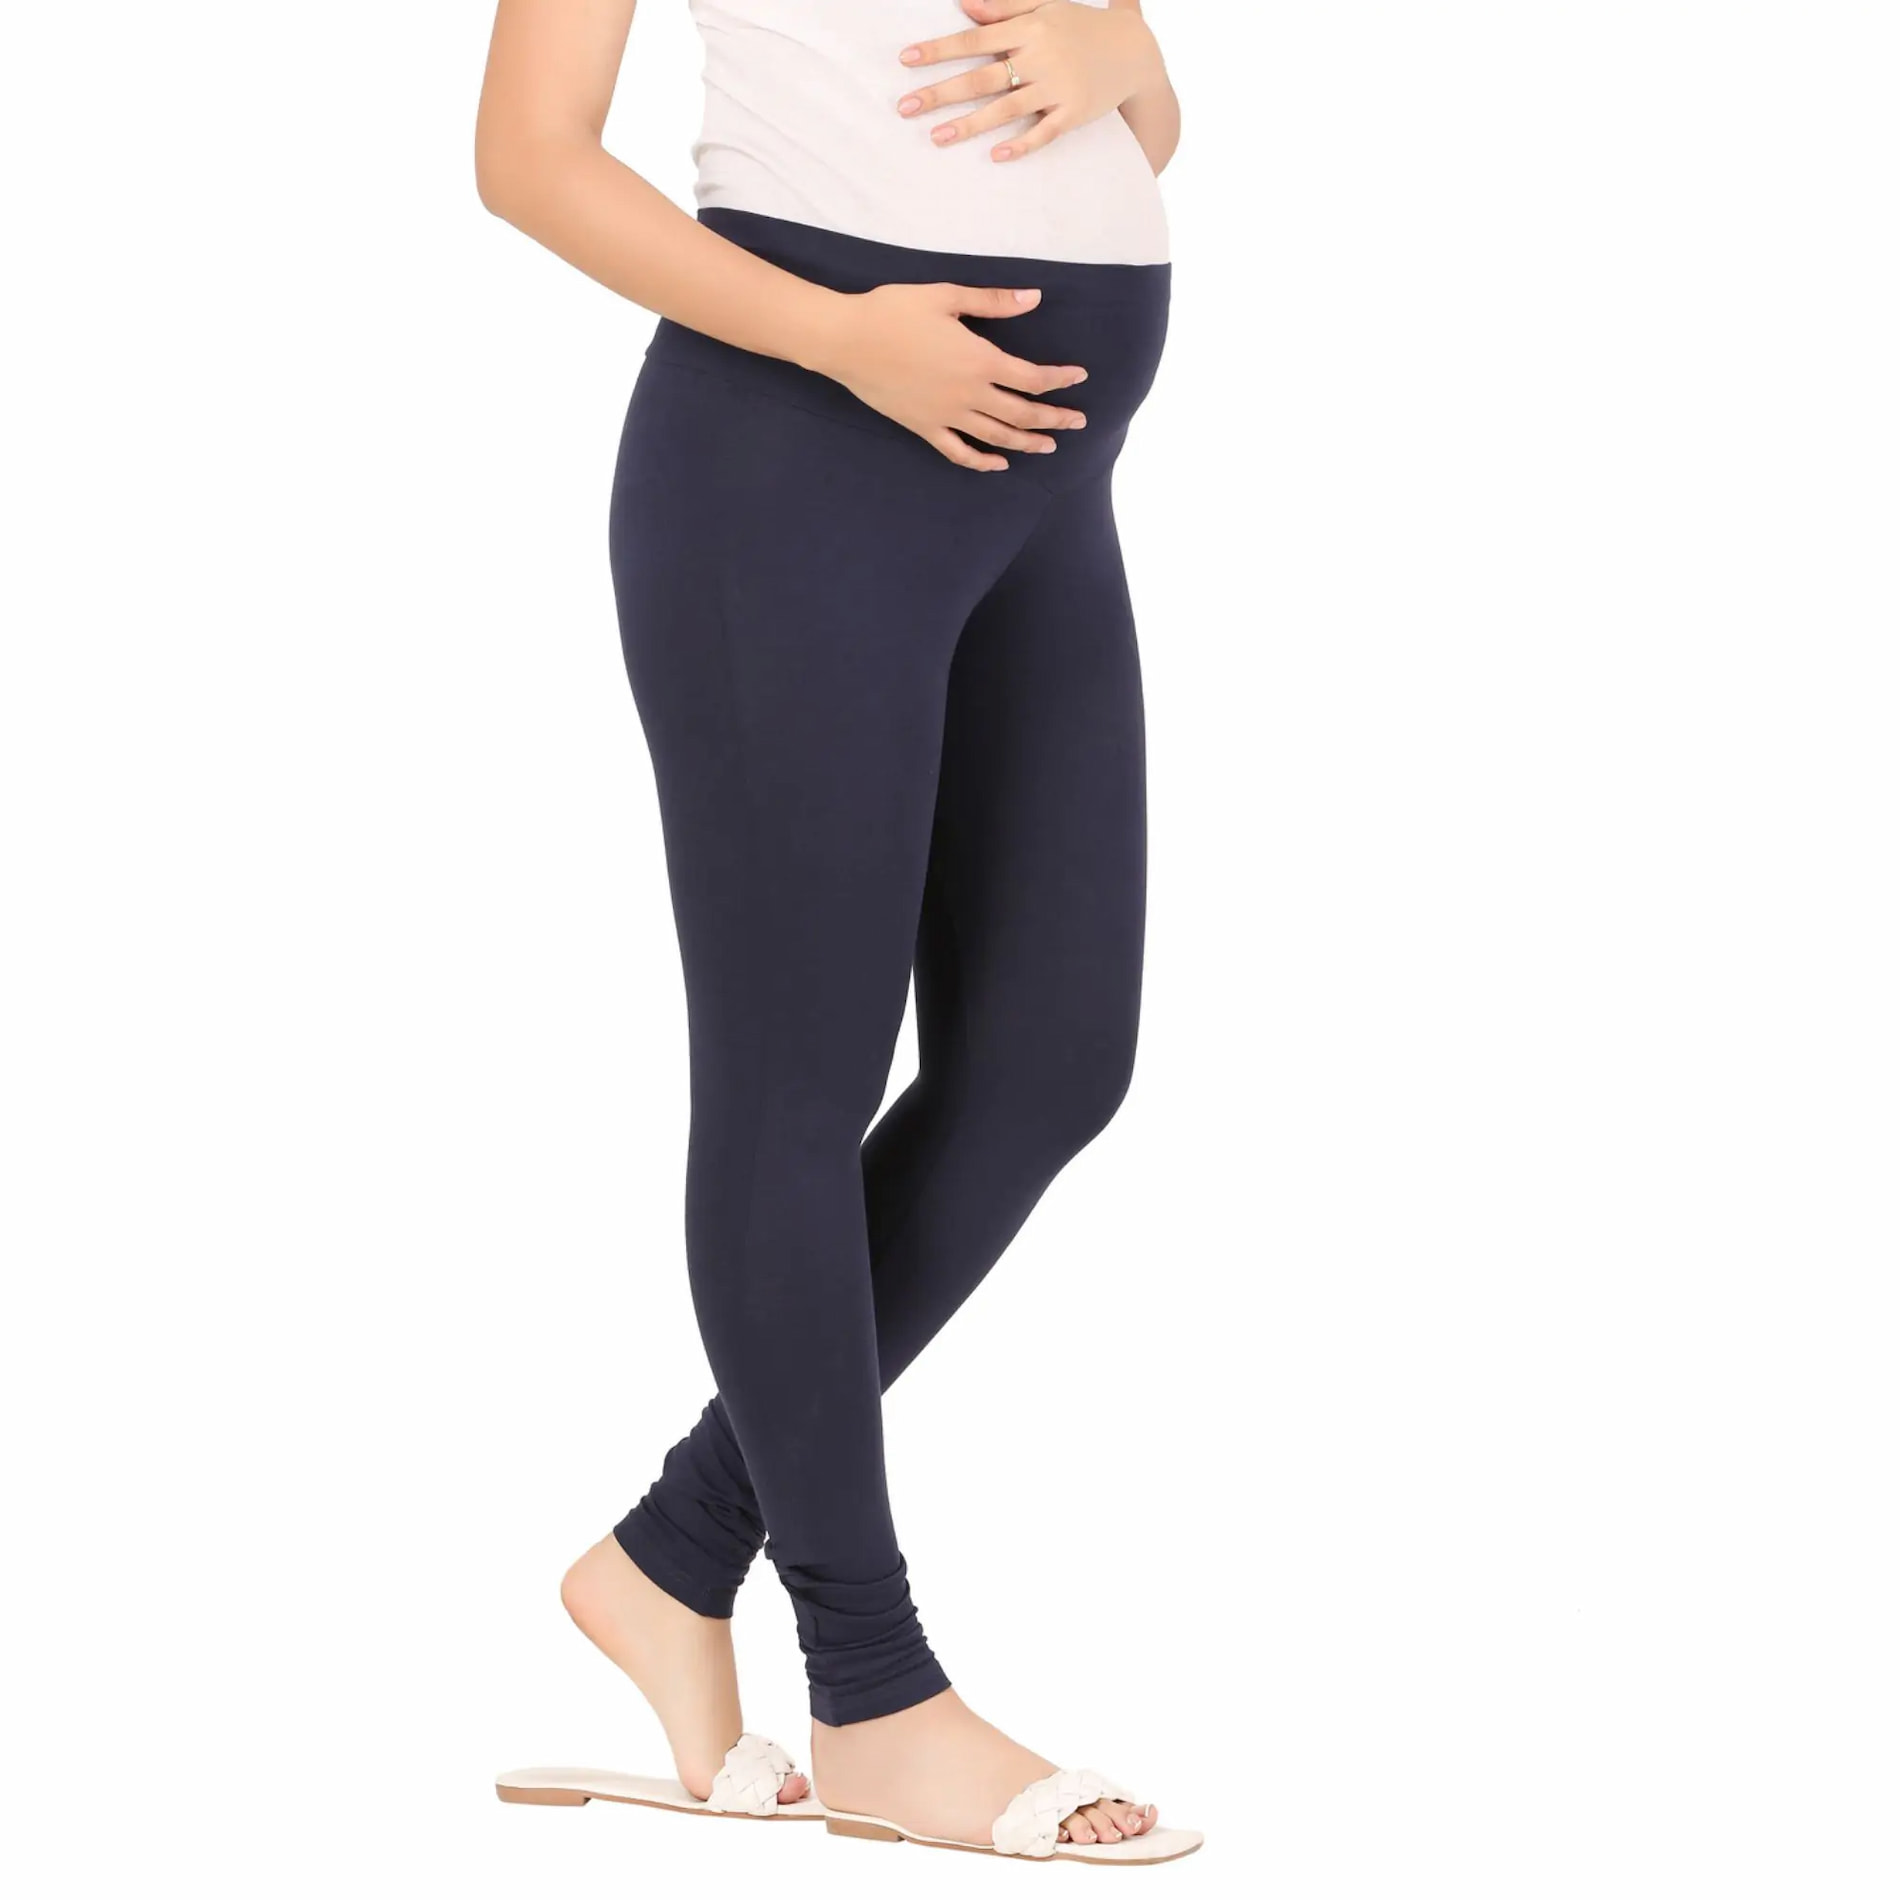 Stretchable Pregnancy & Post Delivery Leggings - Navy (L)